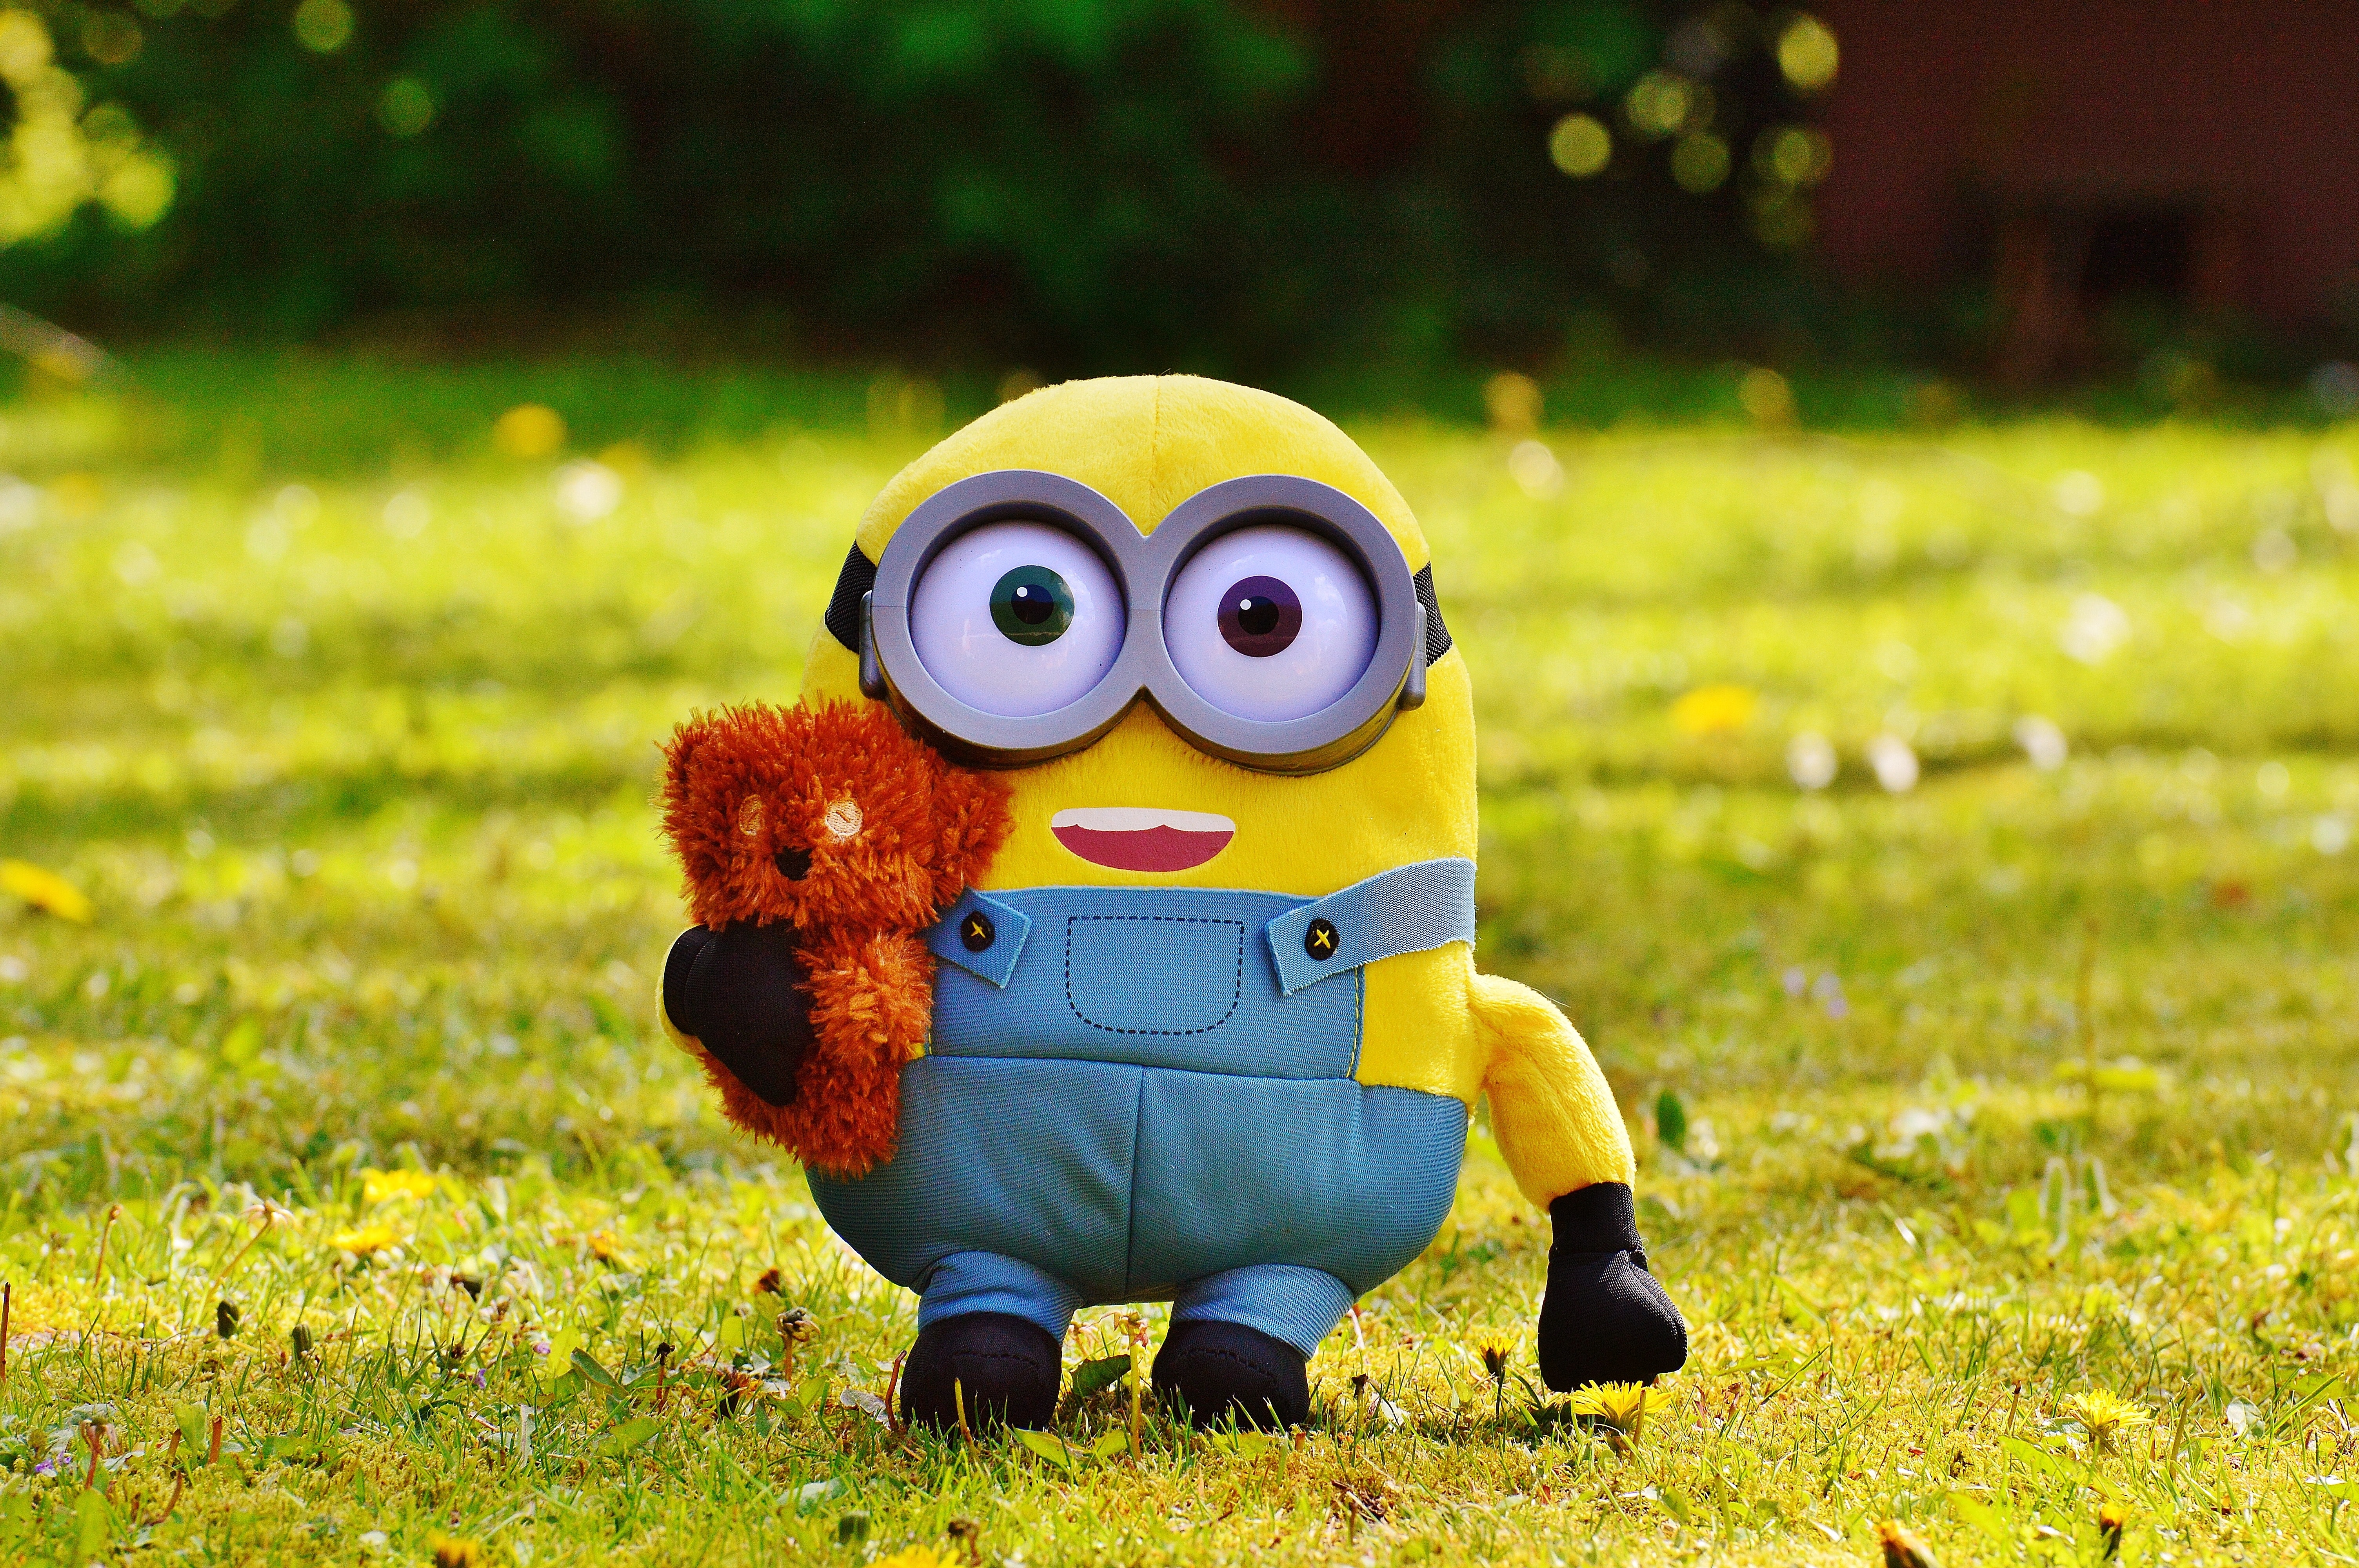 Minion, Fig, Funny, Plush, Cute, grass, front view